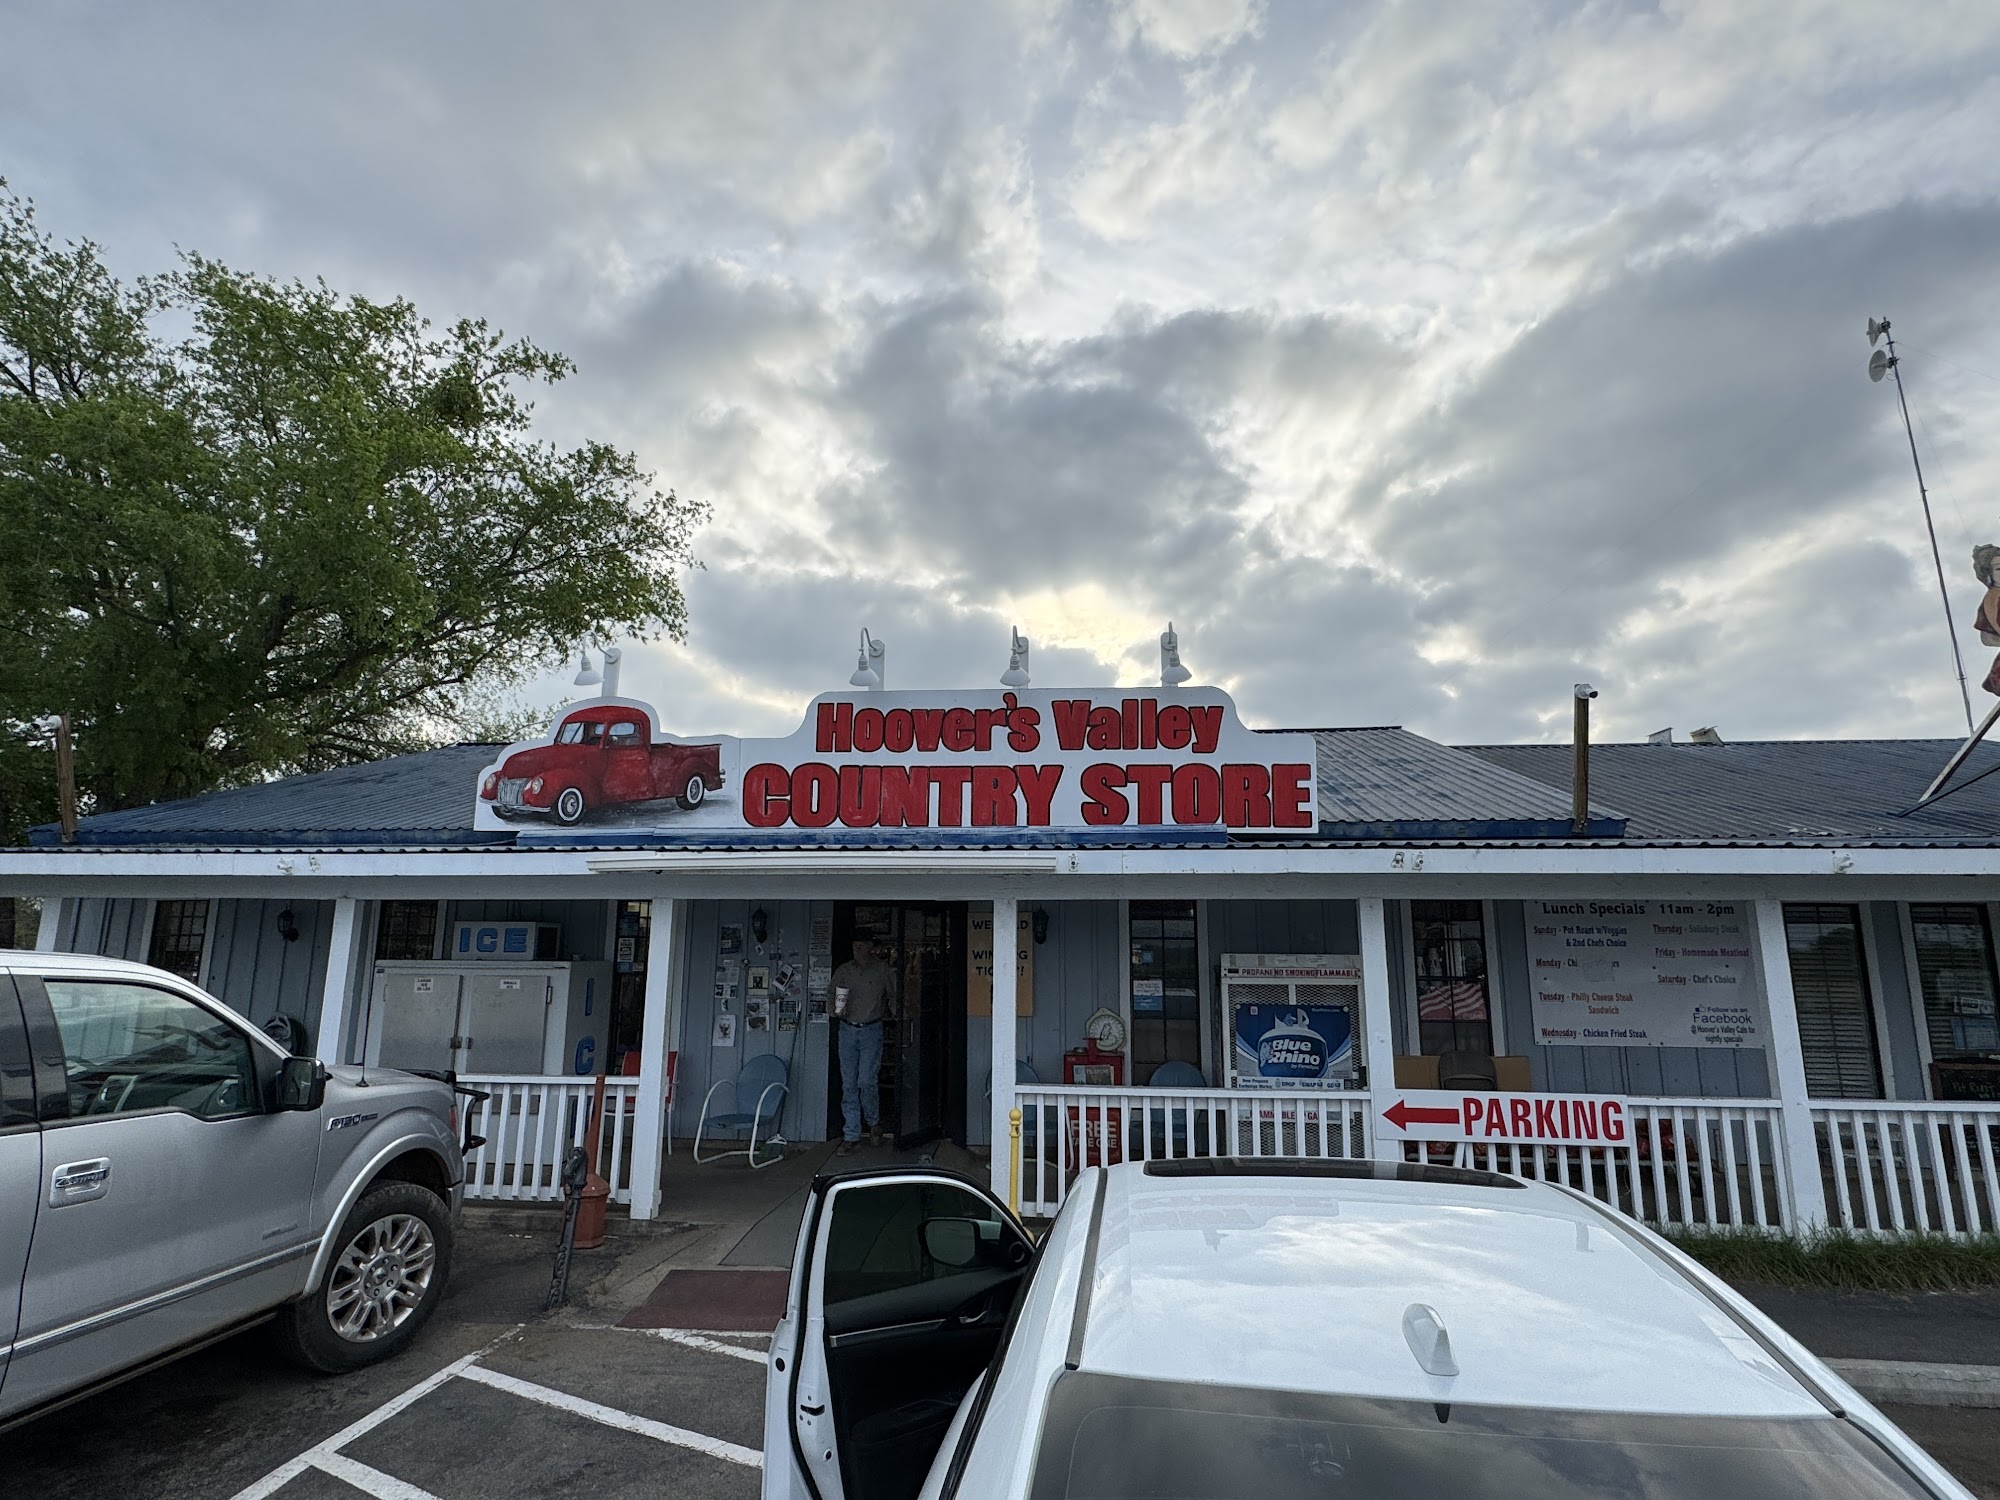 HOOVER VALLEY COUNTRY STORE